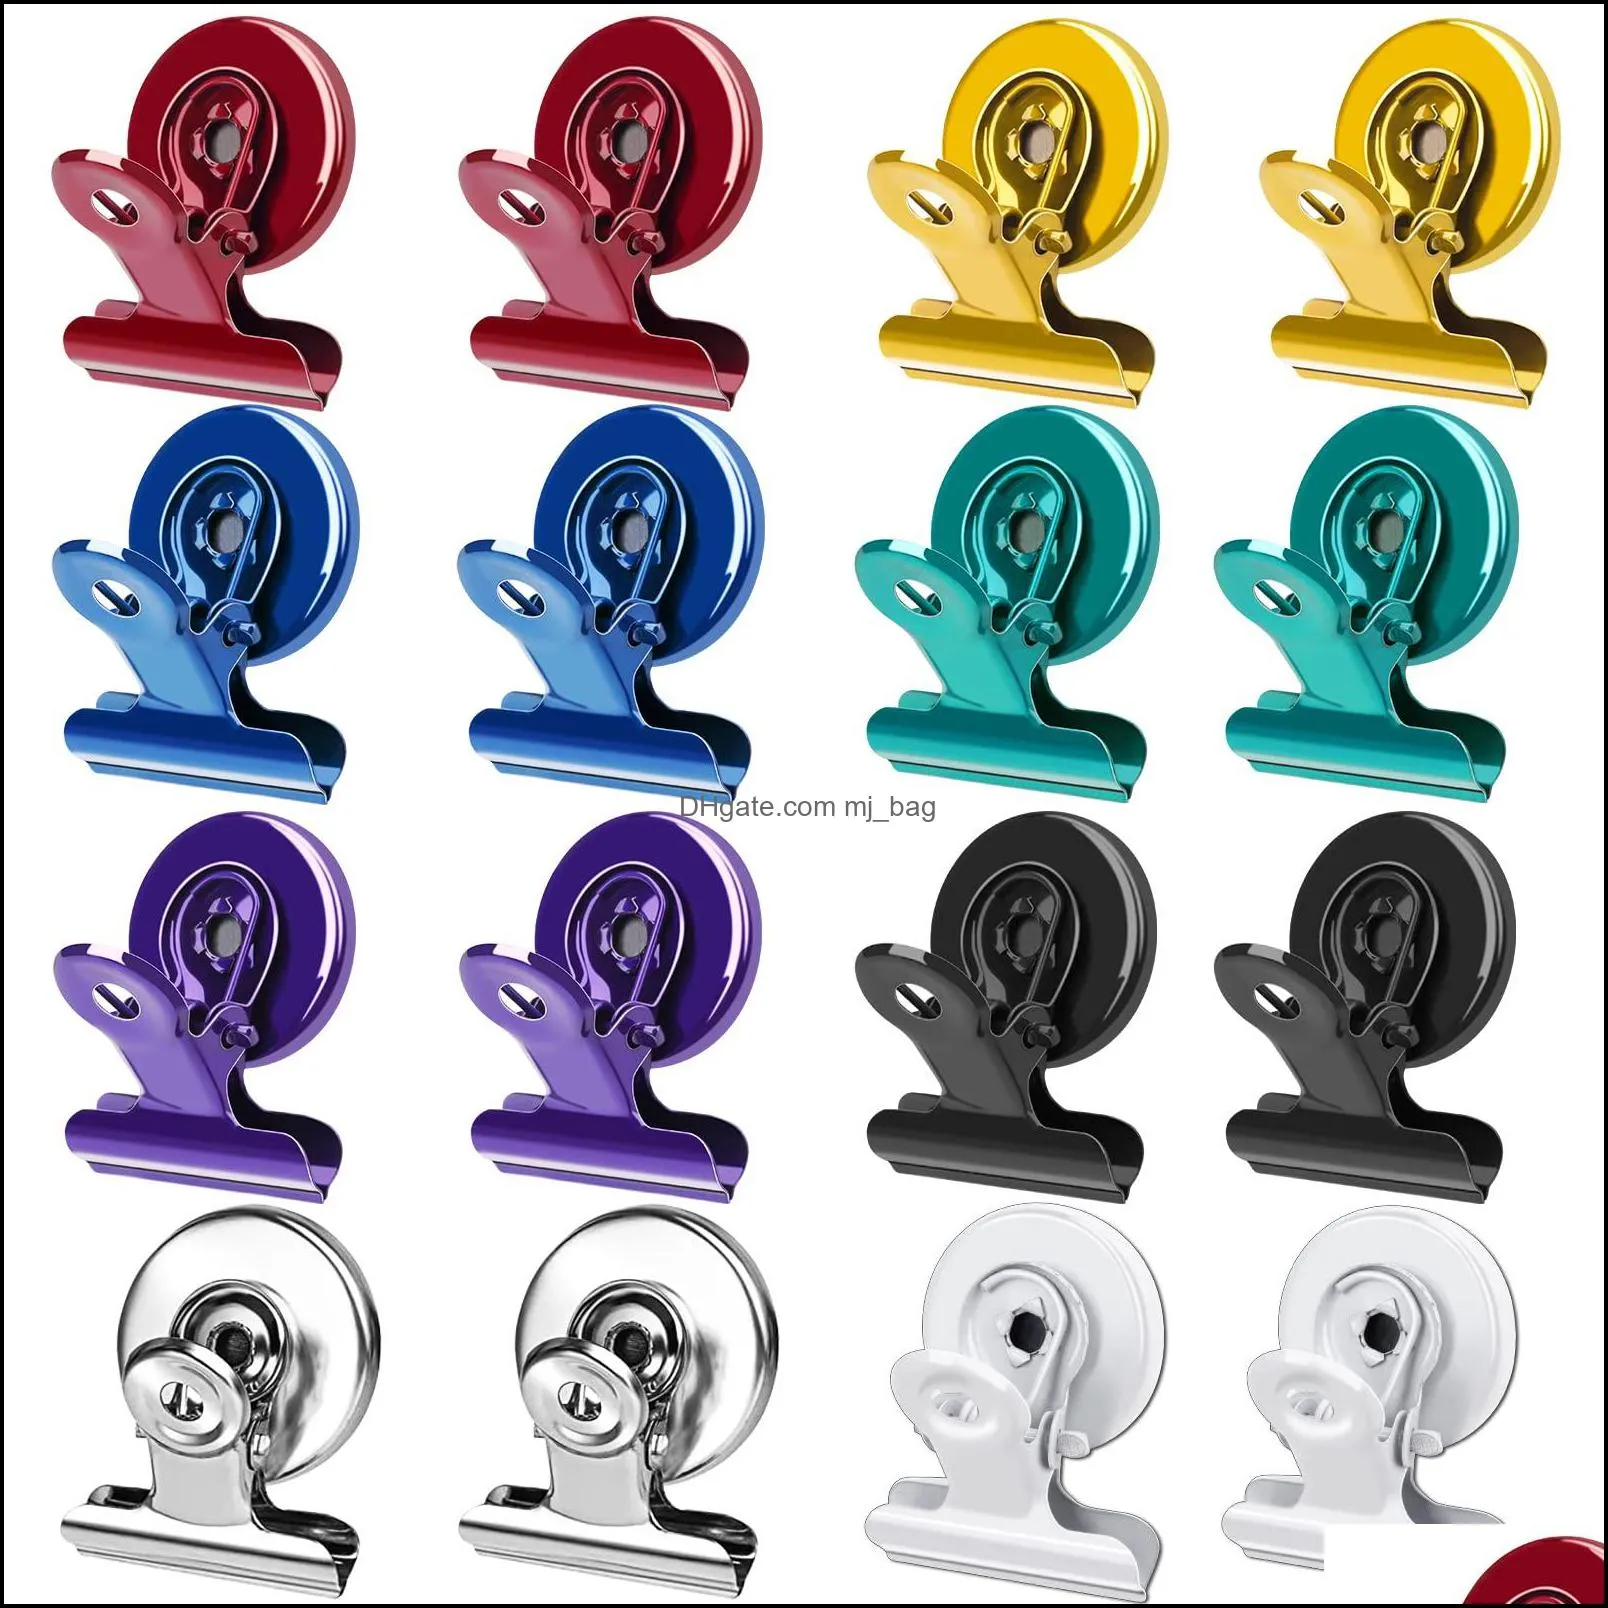 fridge magnets mi metty magnetic clips metal refrigerator whiteboard wall memo note clip colored for clip pos pictures.4 colors amspk